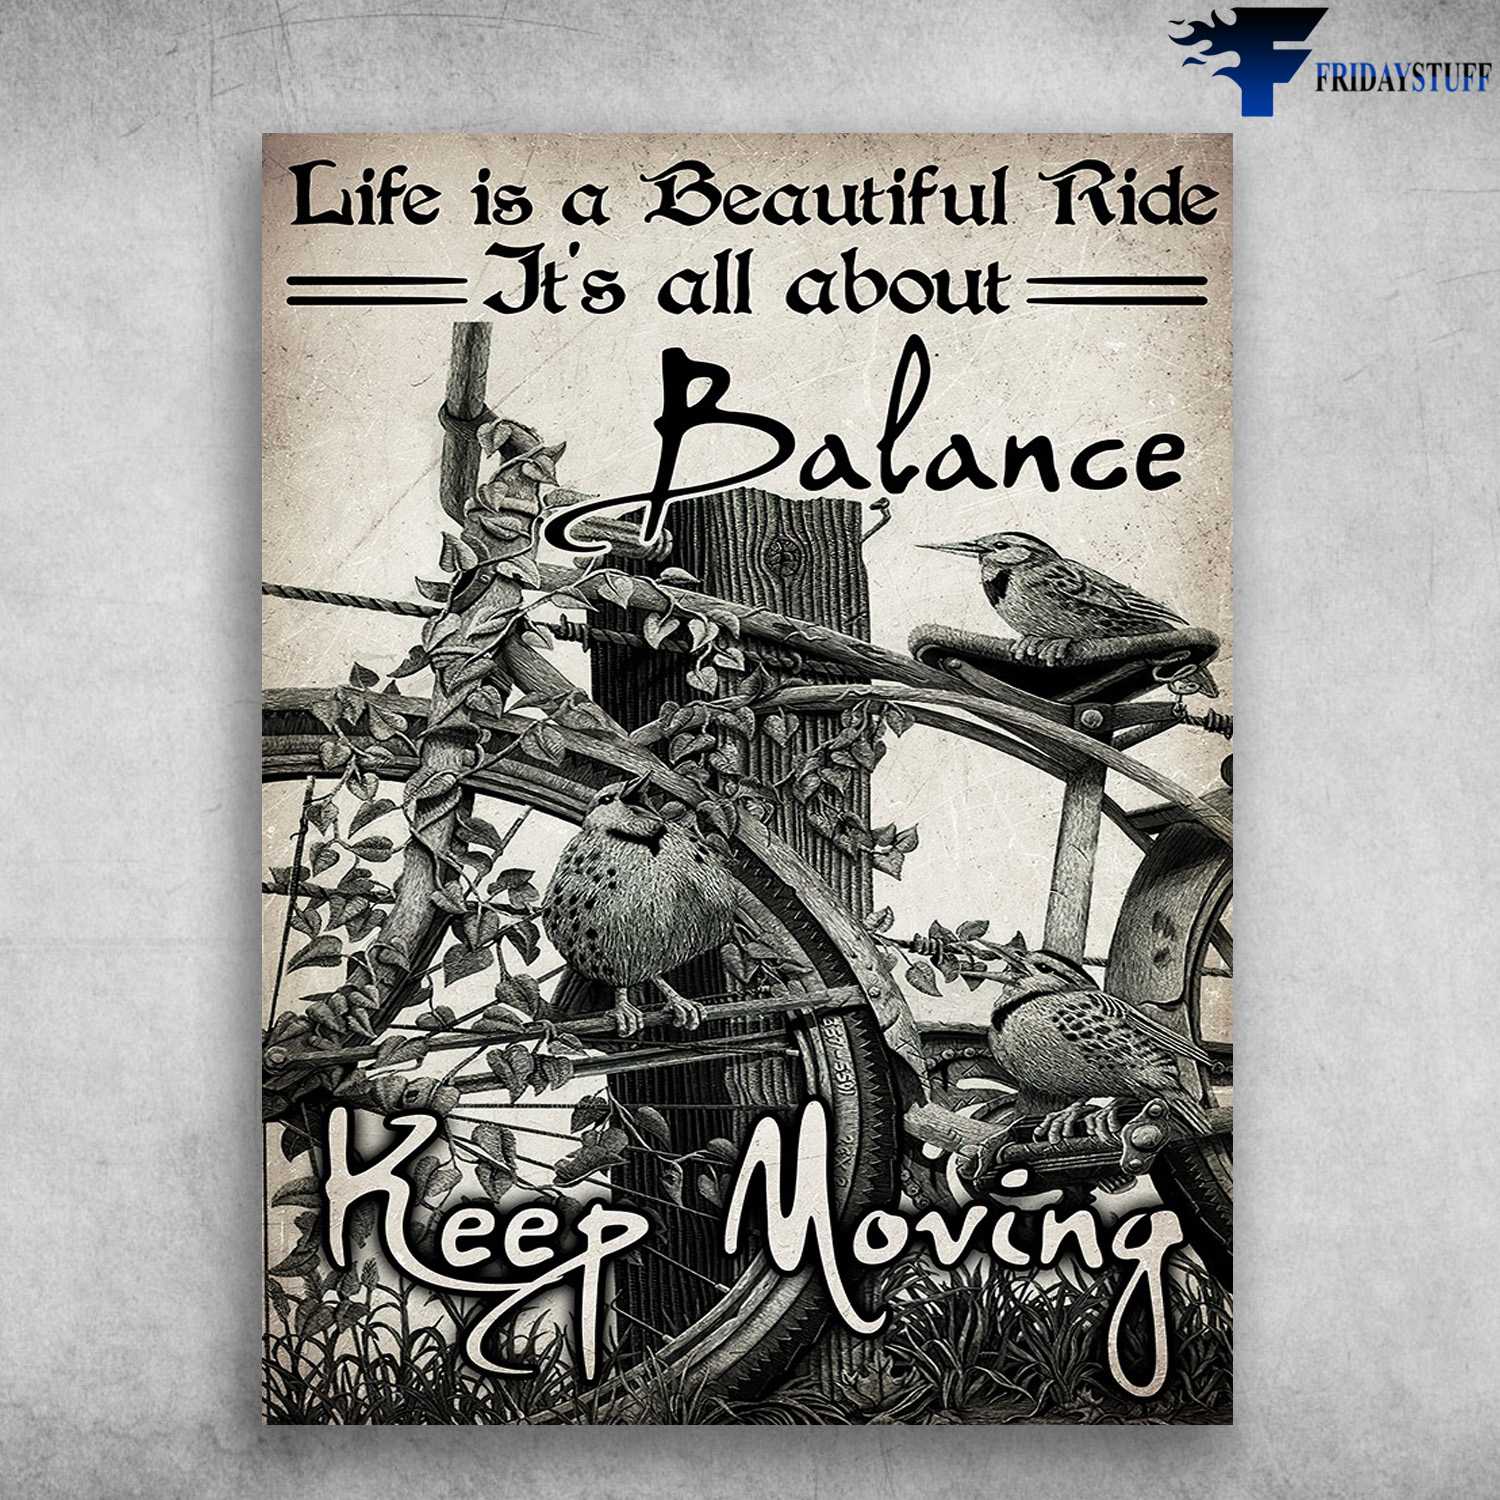 Cycling Poster, Bird And Bicycle - Life Is A Beautiful Ride, It's All About Balance, Keep Moving